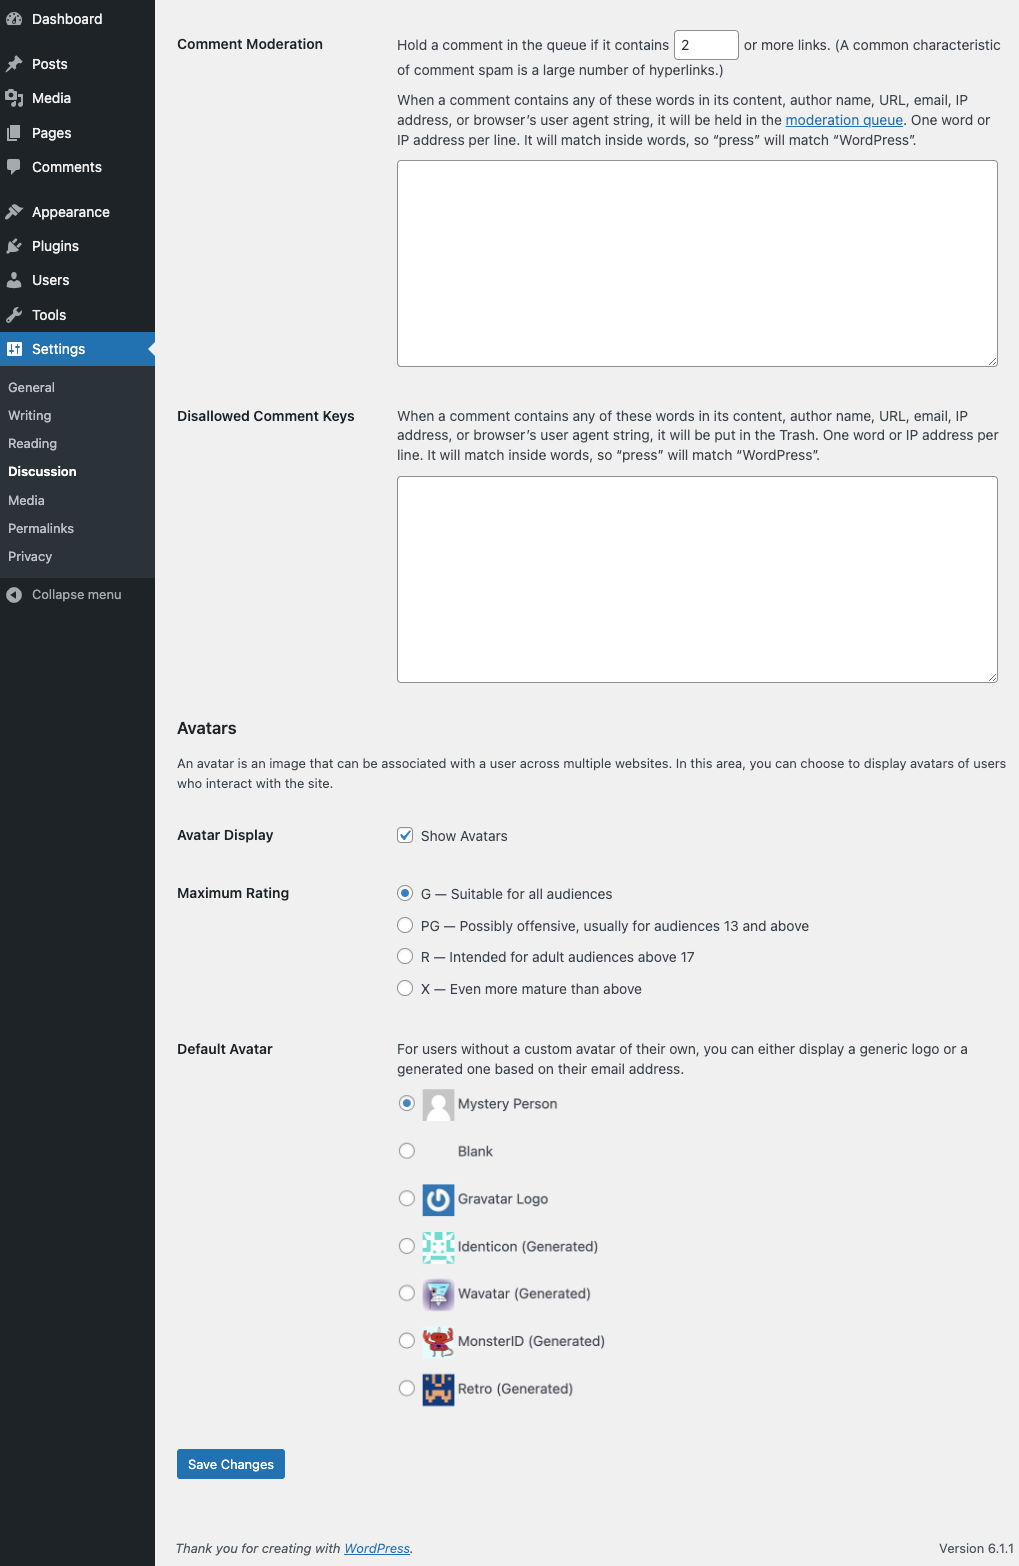 WordPress Settings Discussion options Moderation, Comment Keys and Avatars.